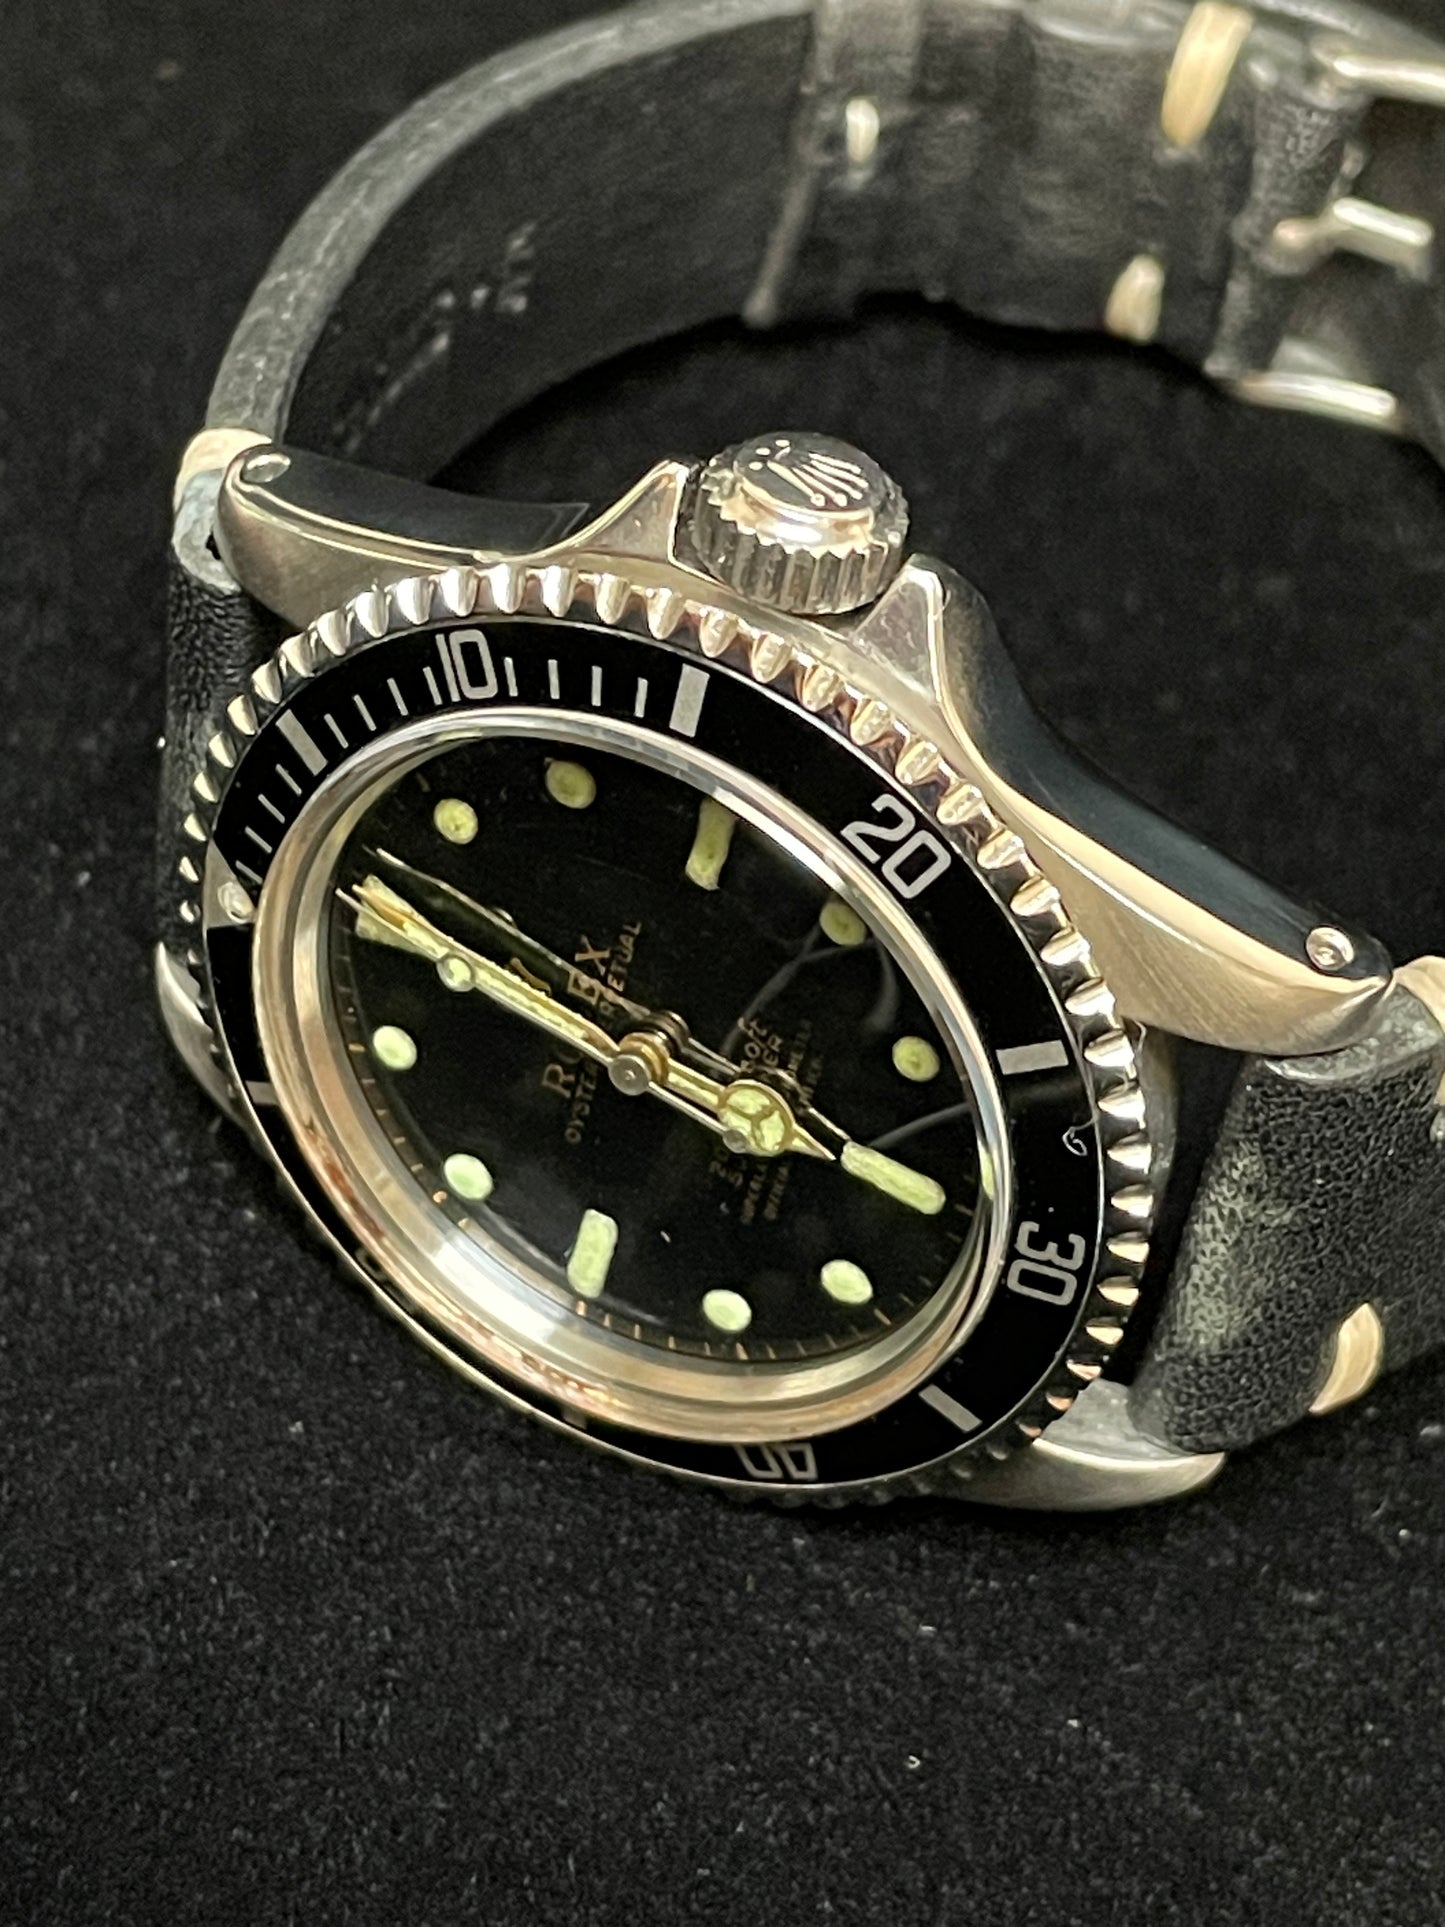 1964 Rolex Submariner 5512 Black Relumed Dial Leather Strap No Papers 40mm